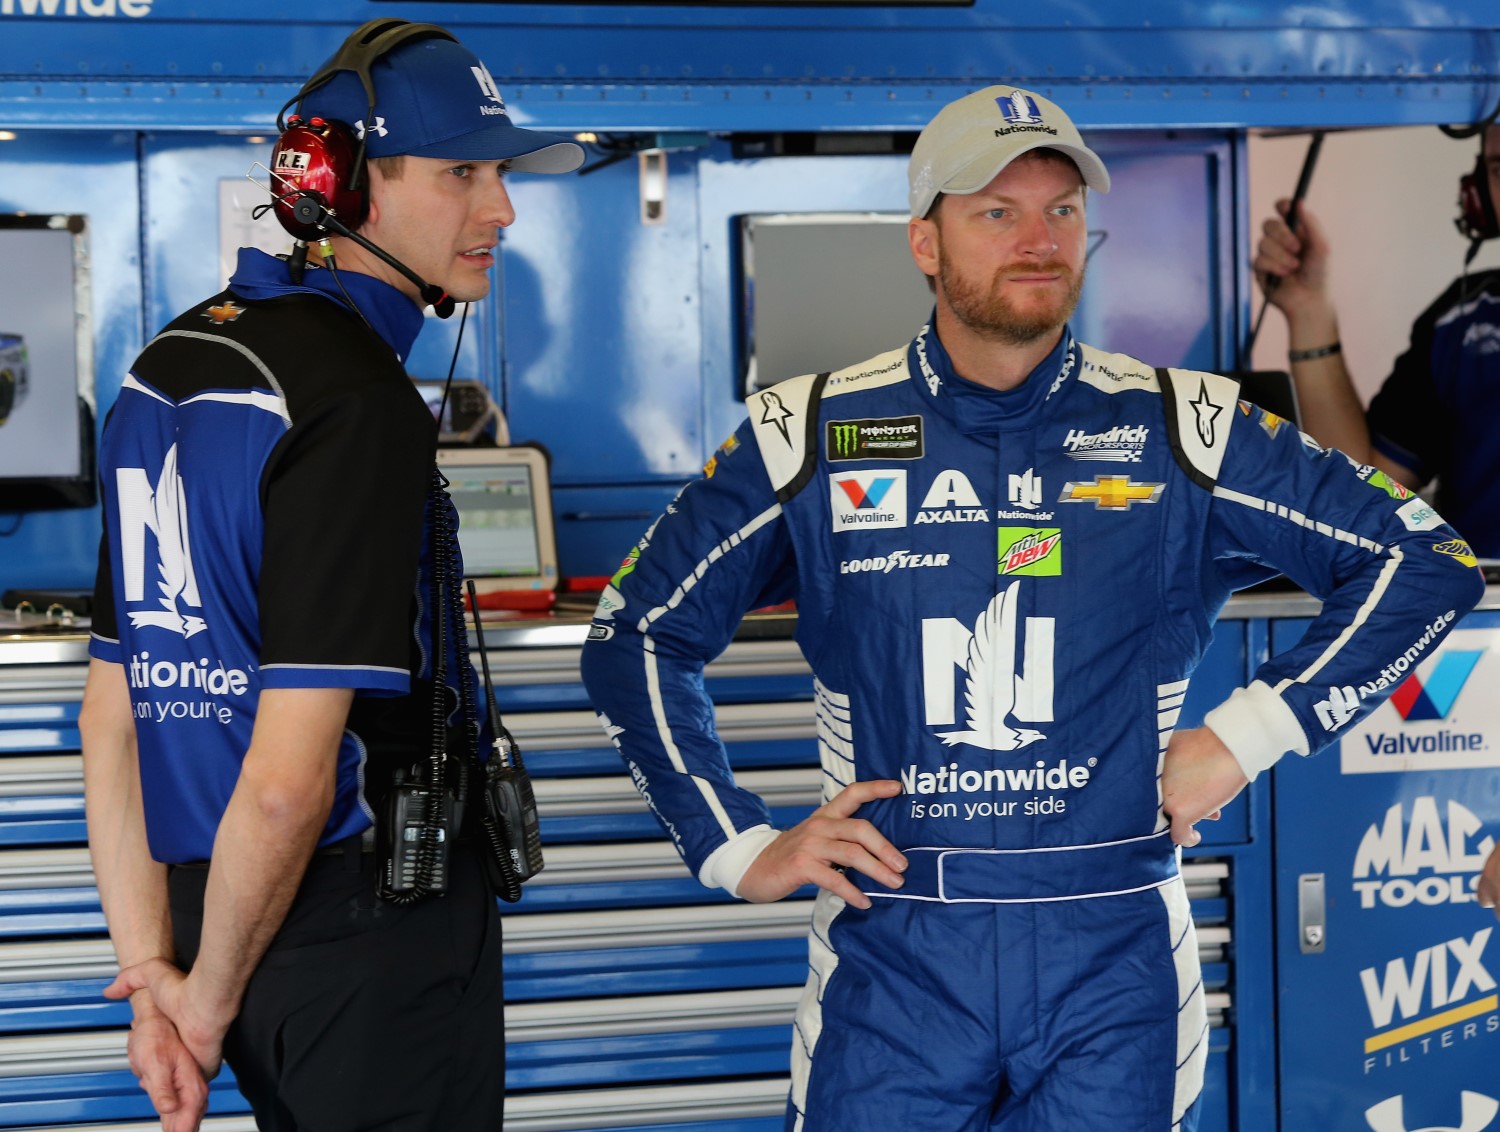 Dale Earnhardt Jr. and Hendrick Motorsports seem to have few answers these days